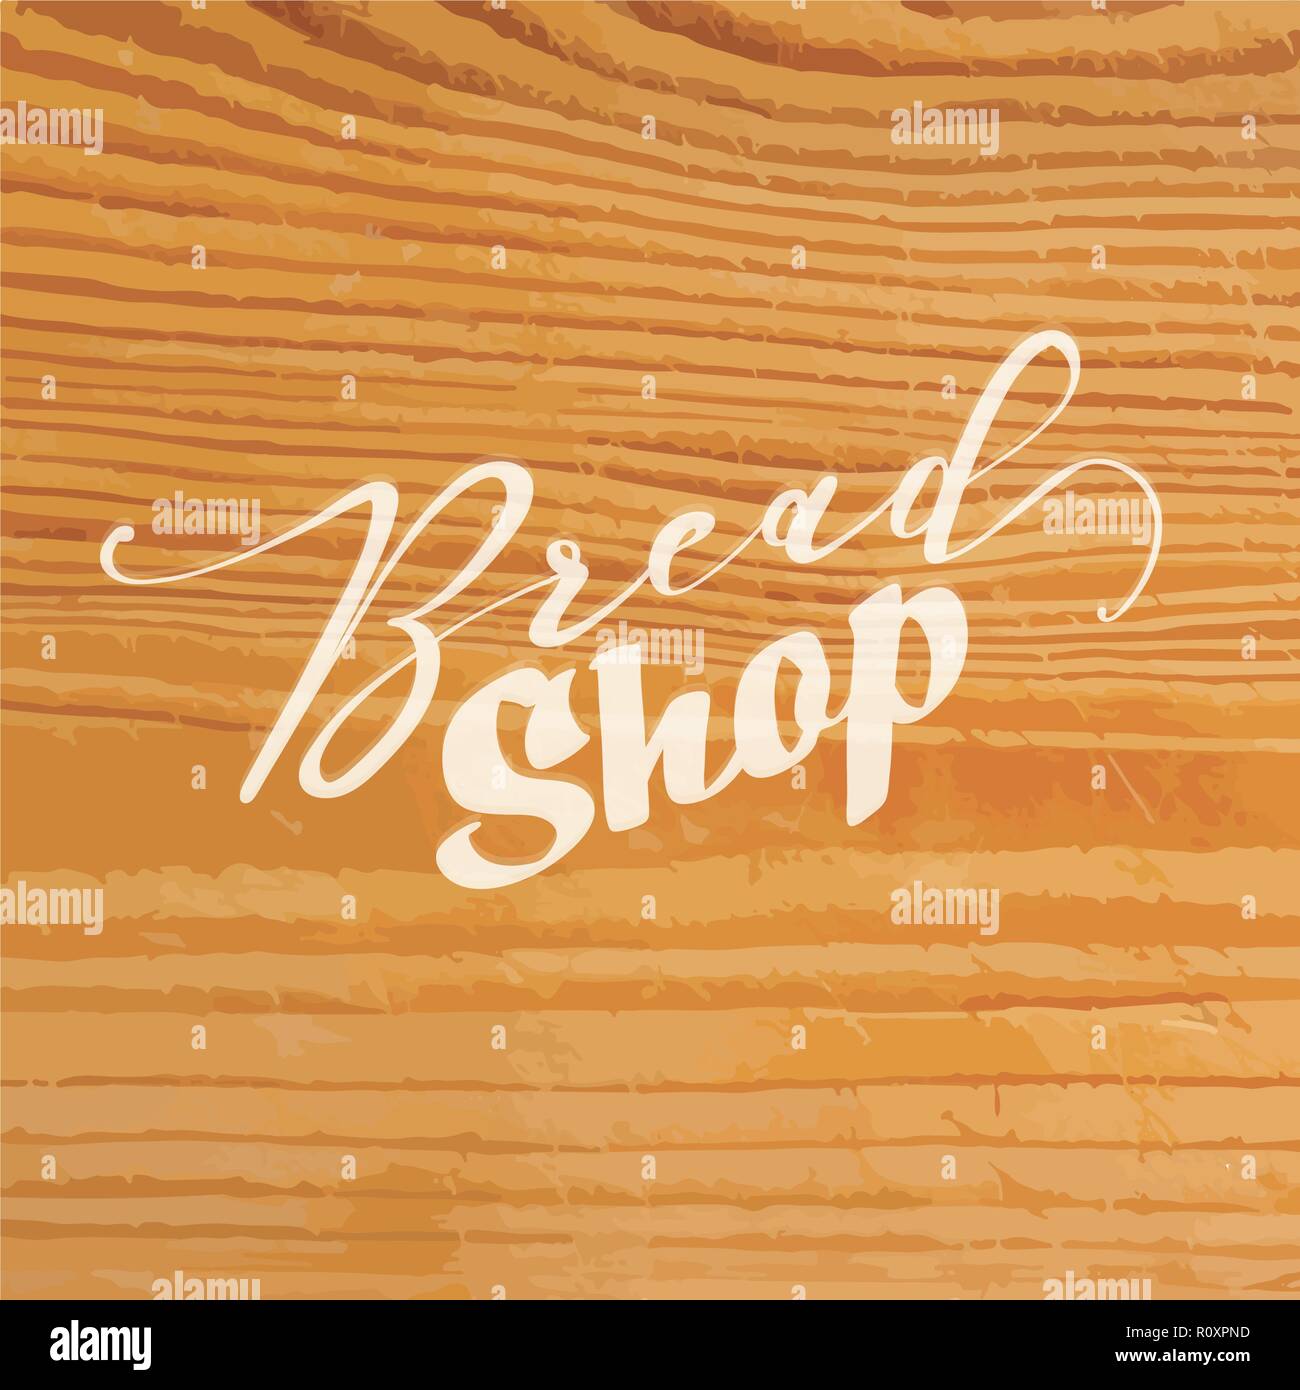 Bread shop lettering on wooden background. Vector illustration drawn by hand. Stock Vector